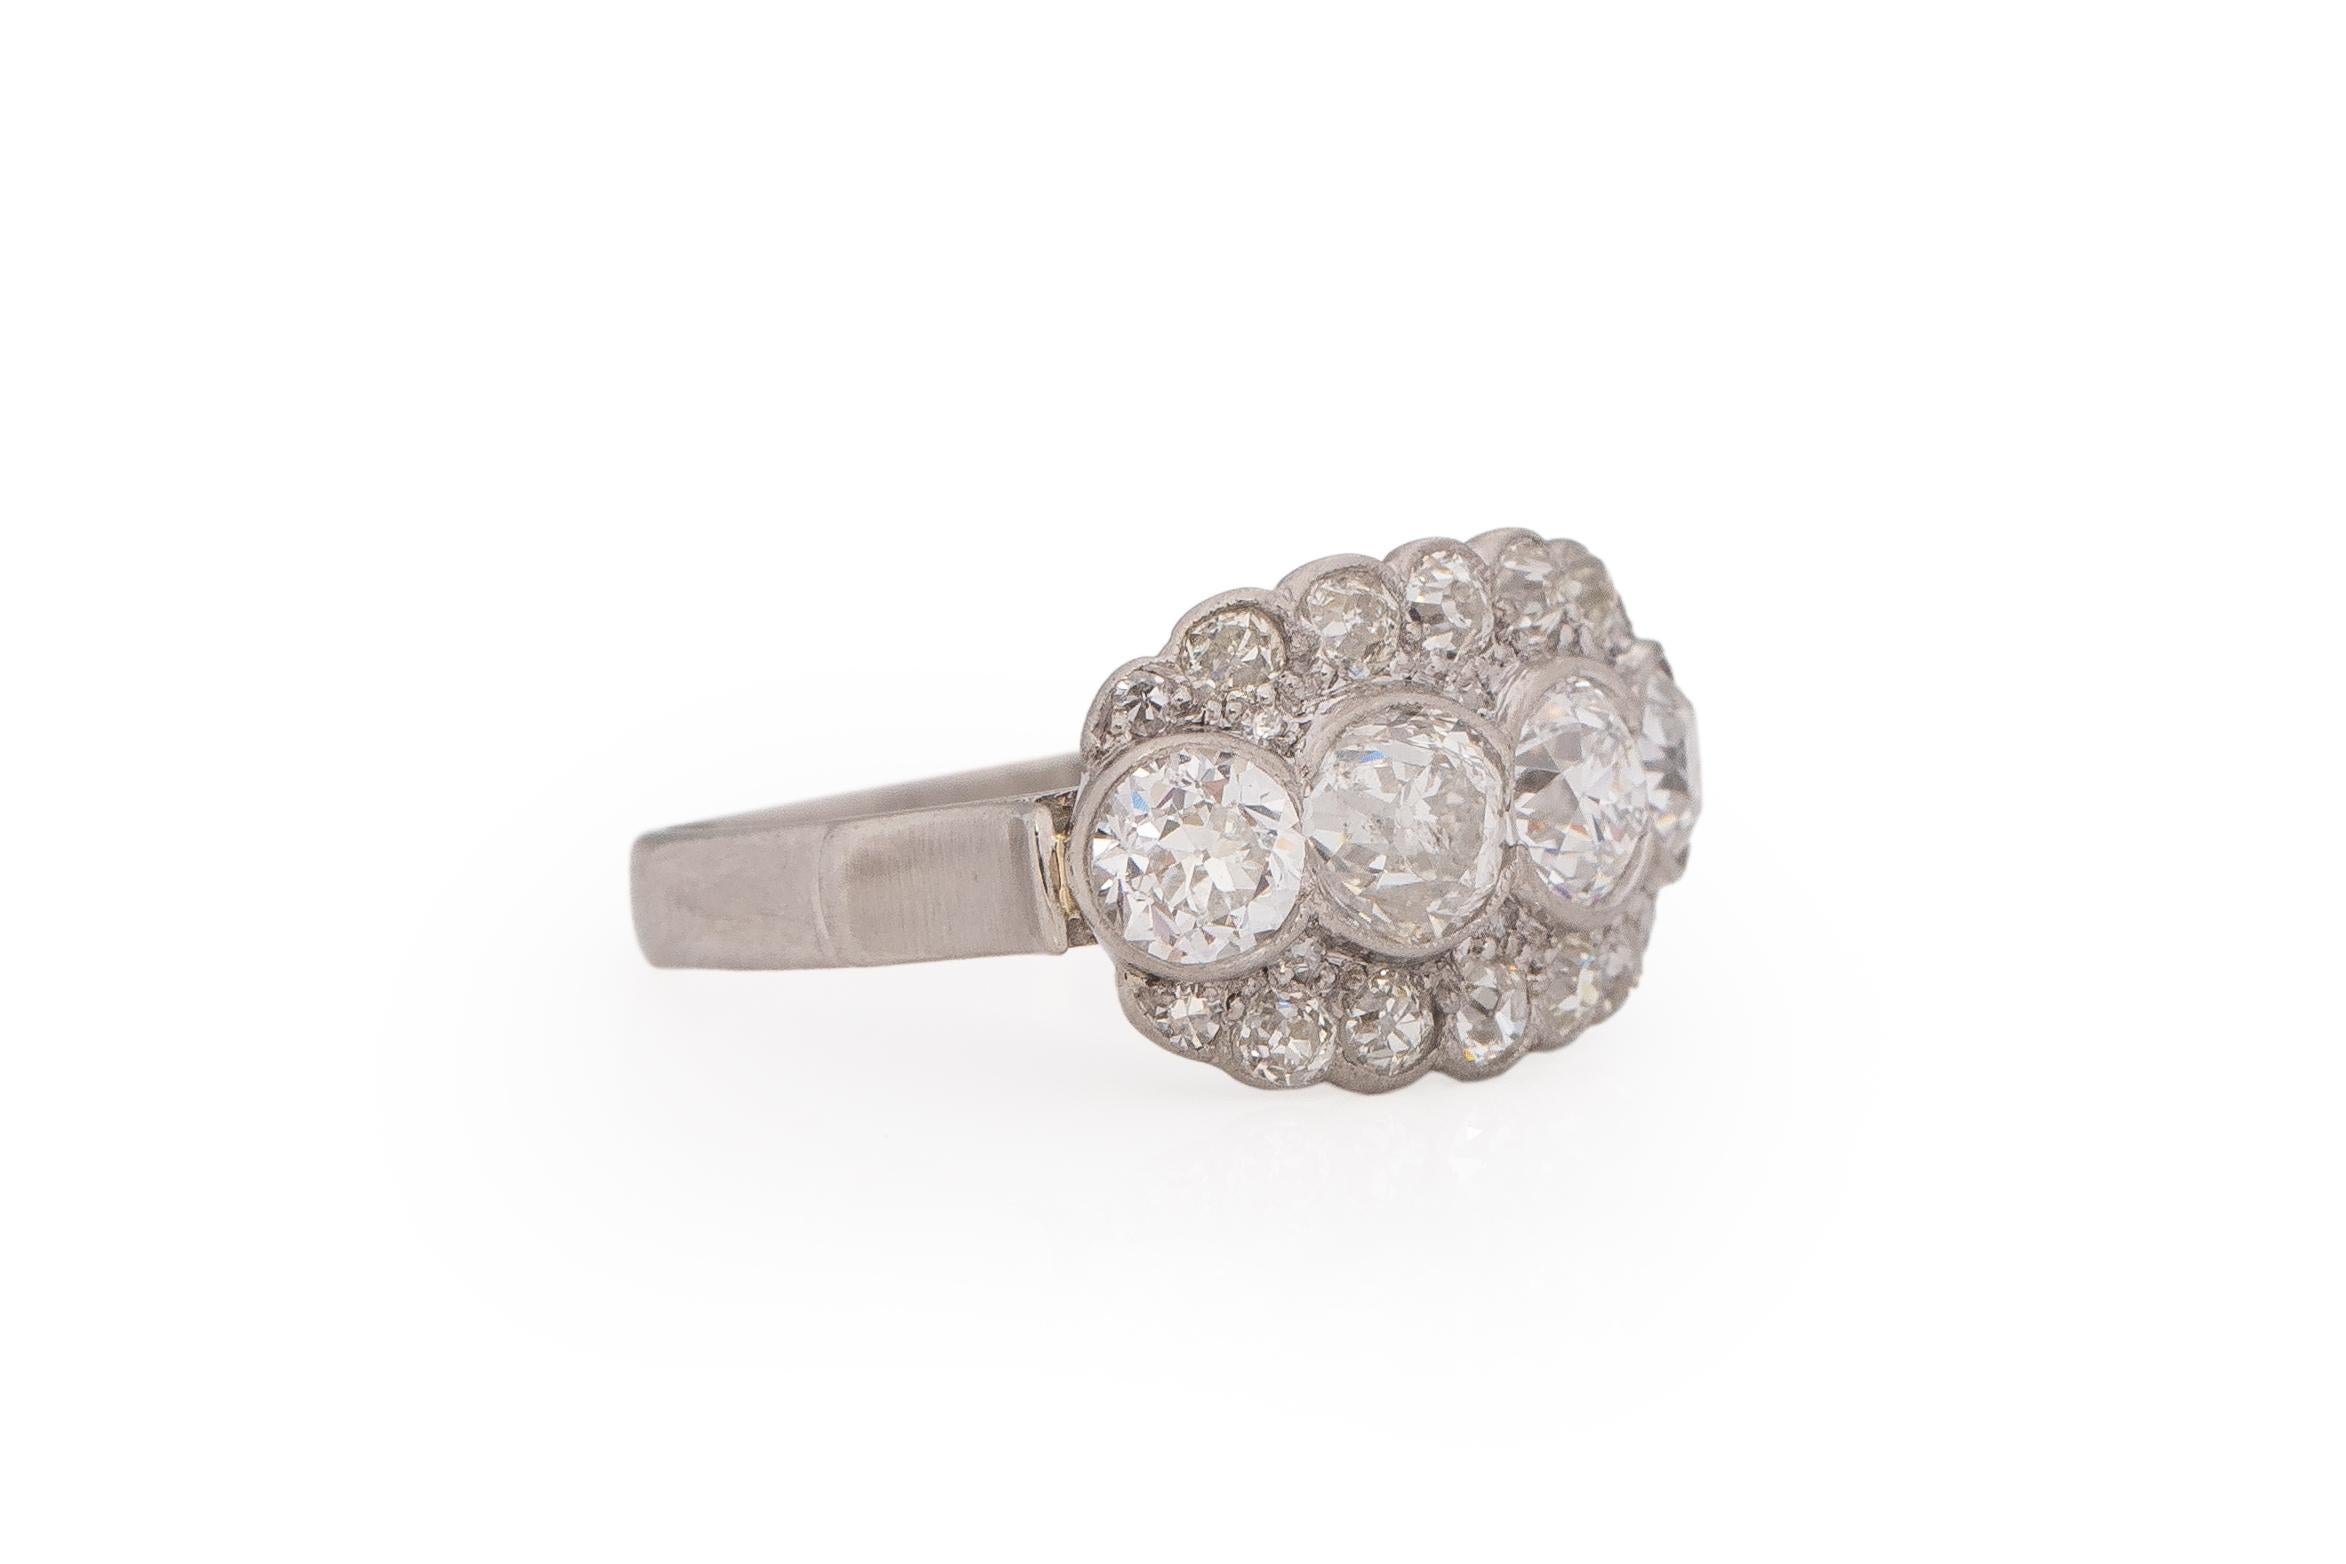 Ring Size: 5.75
Metal Type: Platinum [Hallmarked, and Tested]
Weight: 4.8 grams

Diamond Details:
Weight: 1.40carat, total weight (4 Large Center Diamonds)
Cut: Old European brilliant
Color: H-I
Clarity: SI1-2

Side Stone Details:
Weight: .50carat,